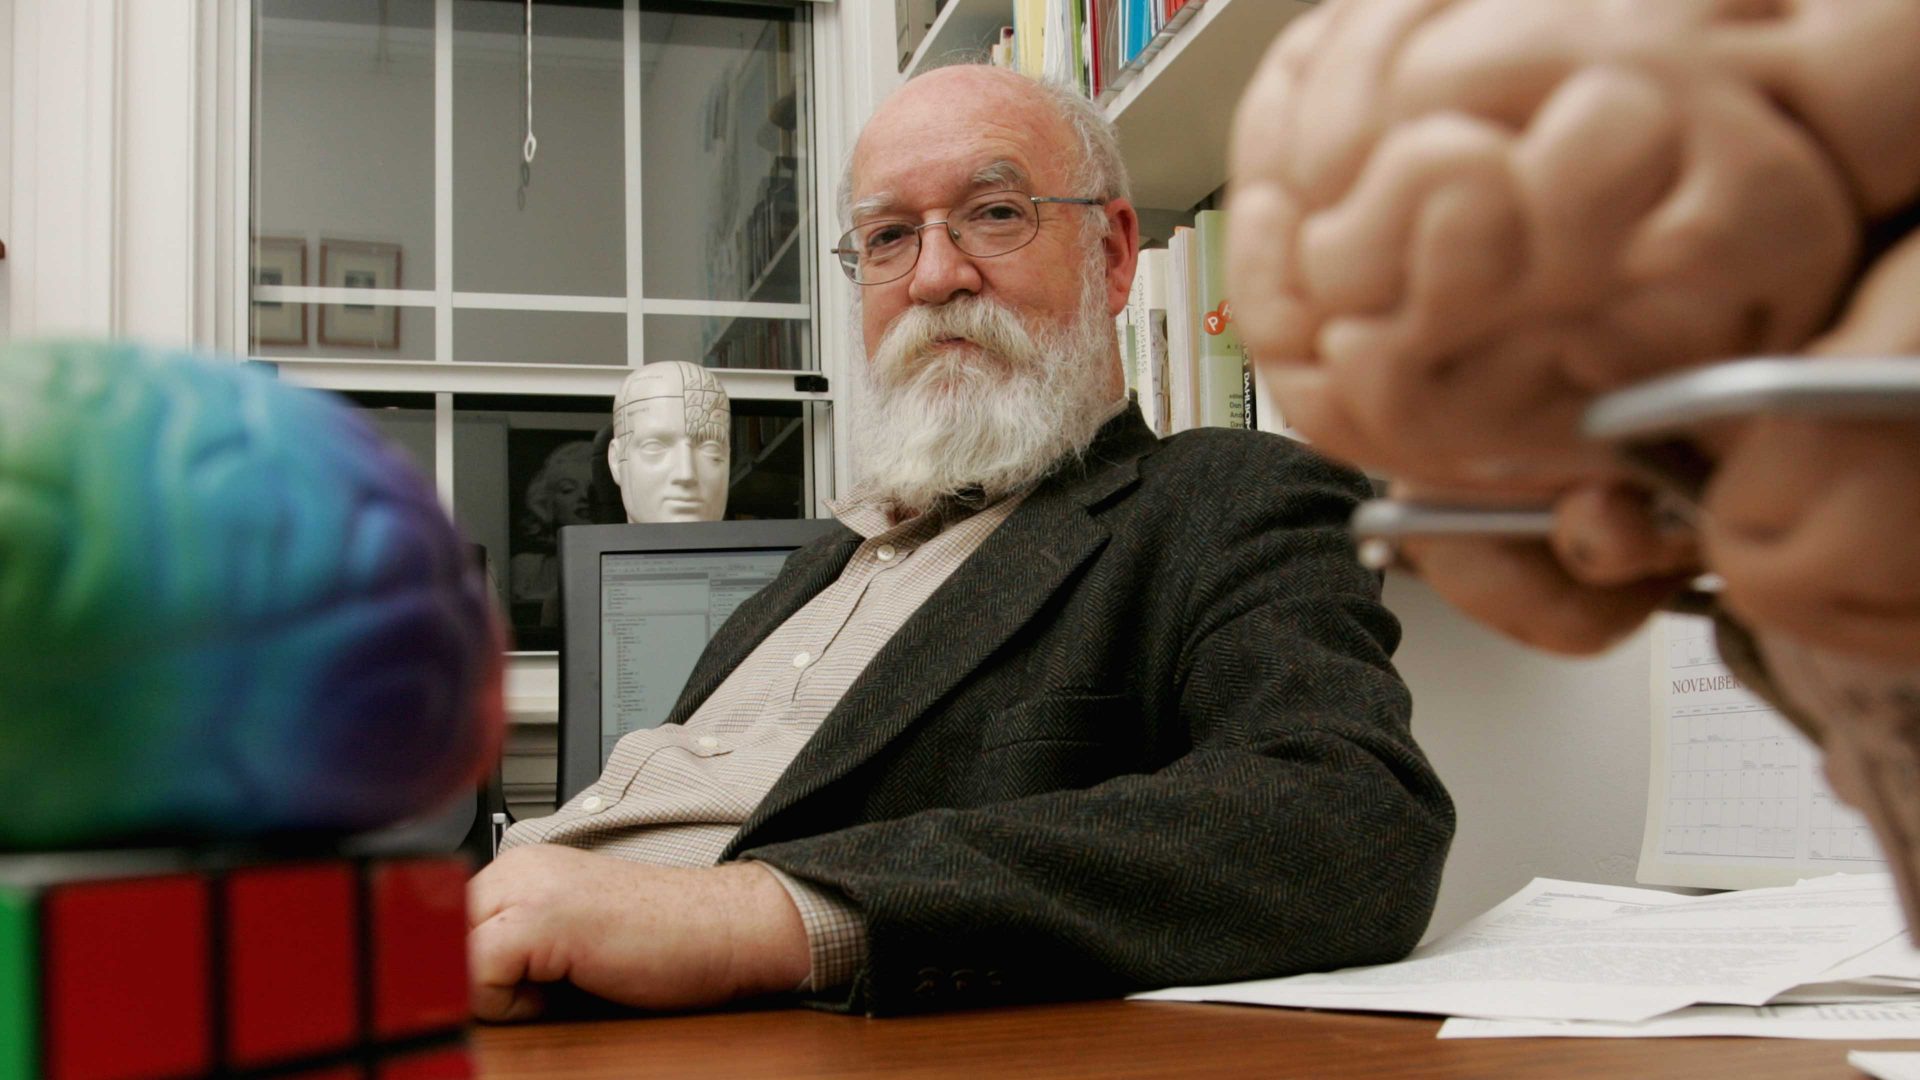 Daniel C. Dennett, University Professor and Austin B. Fletcher Professor of Philosophy, and Director of the Center for Cognitive Studies at Tufts University, photographed in his office at Tufts. Photo: Rick Friedman/Corbis via Getty Images